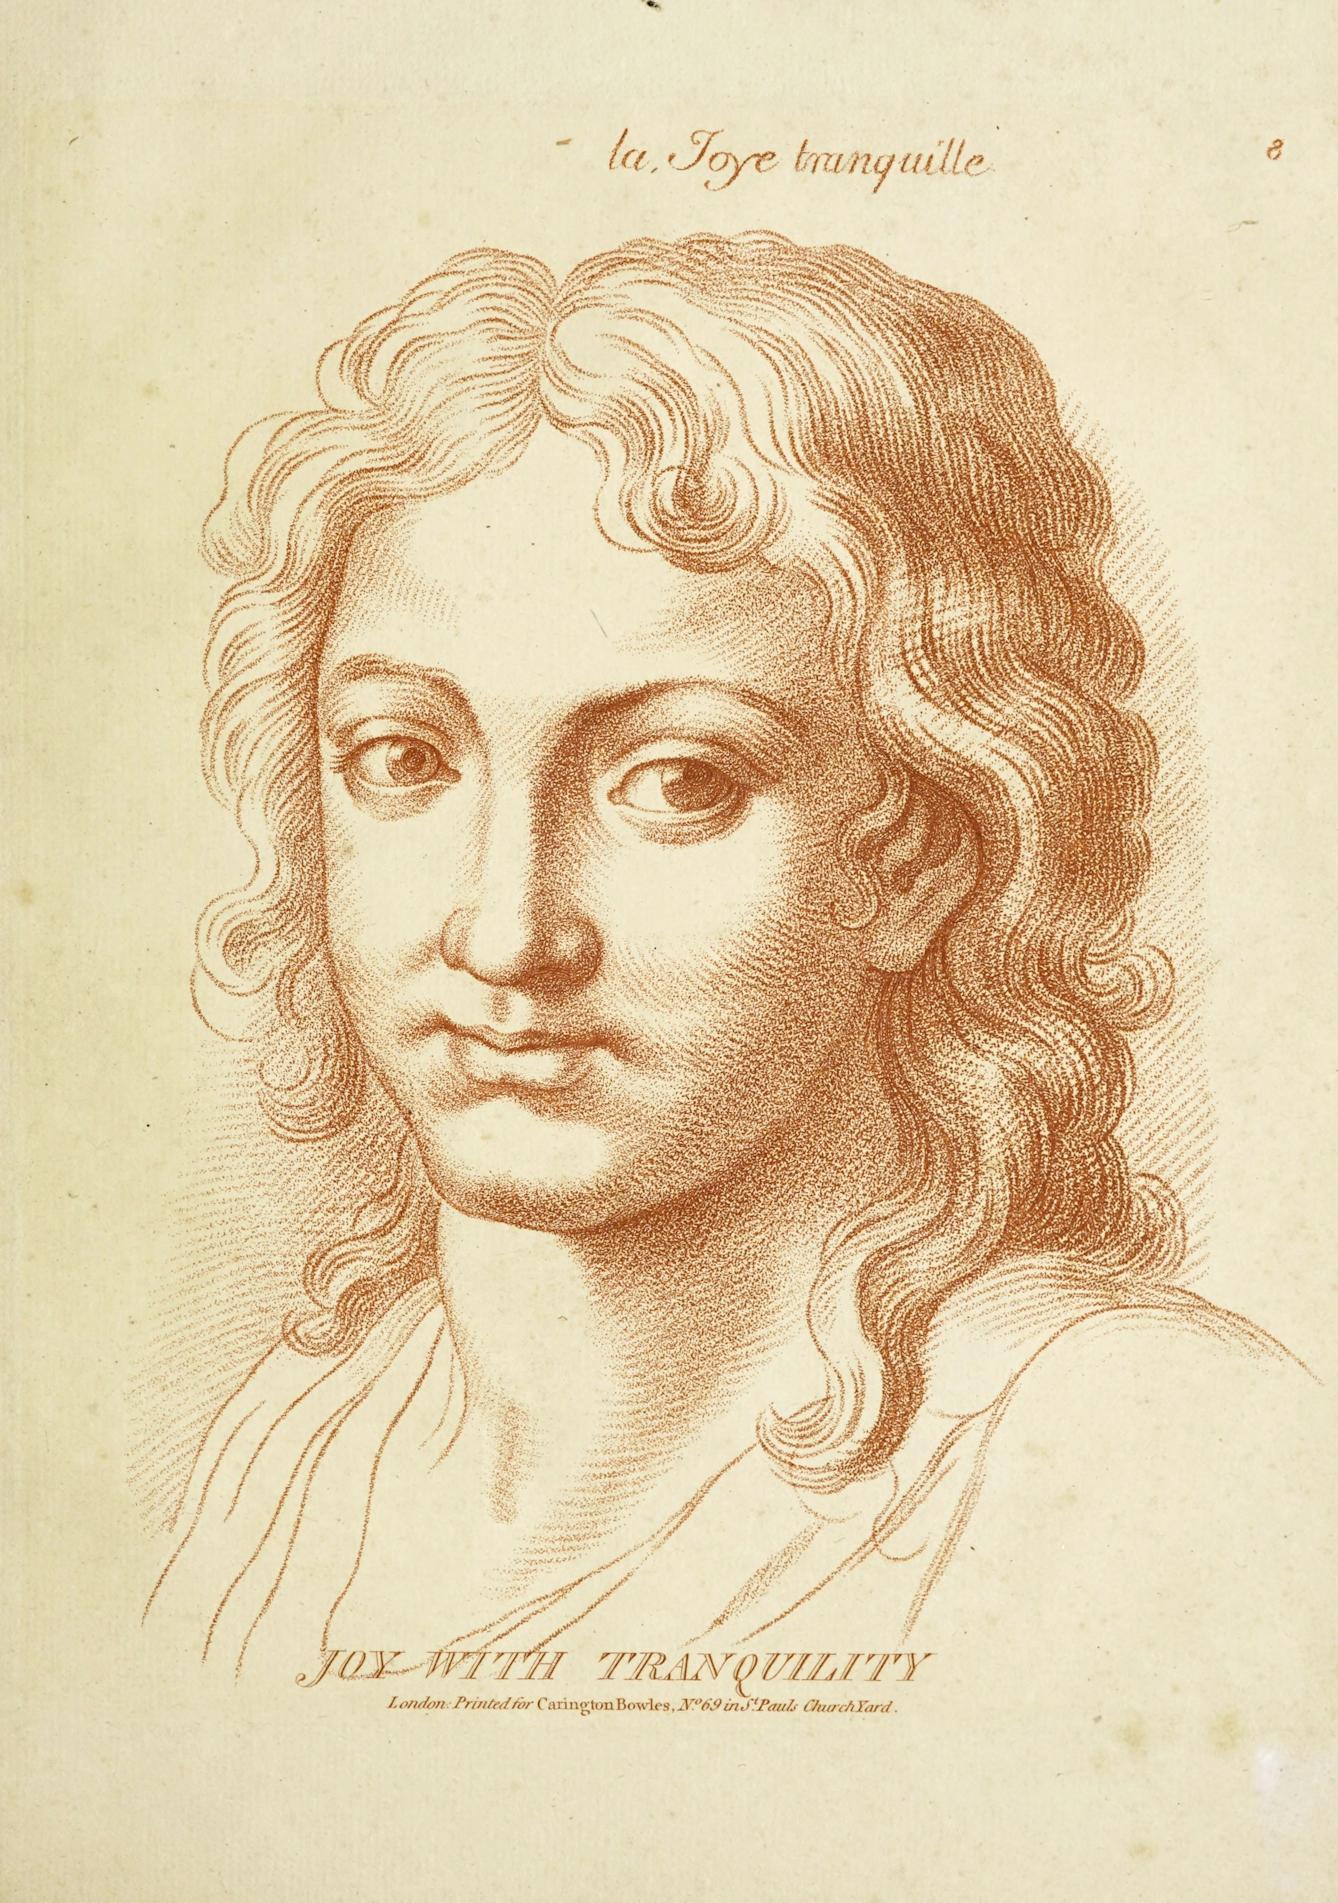 Drawing of a male head expressing 'joy with tranquility' by Charles Le Brun